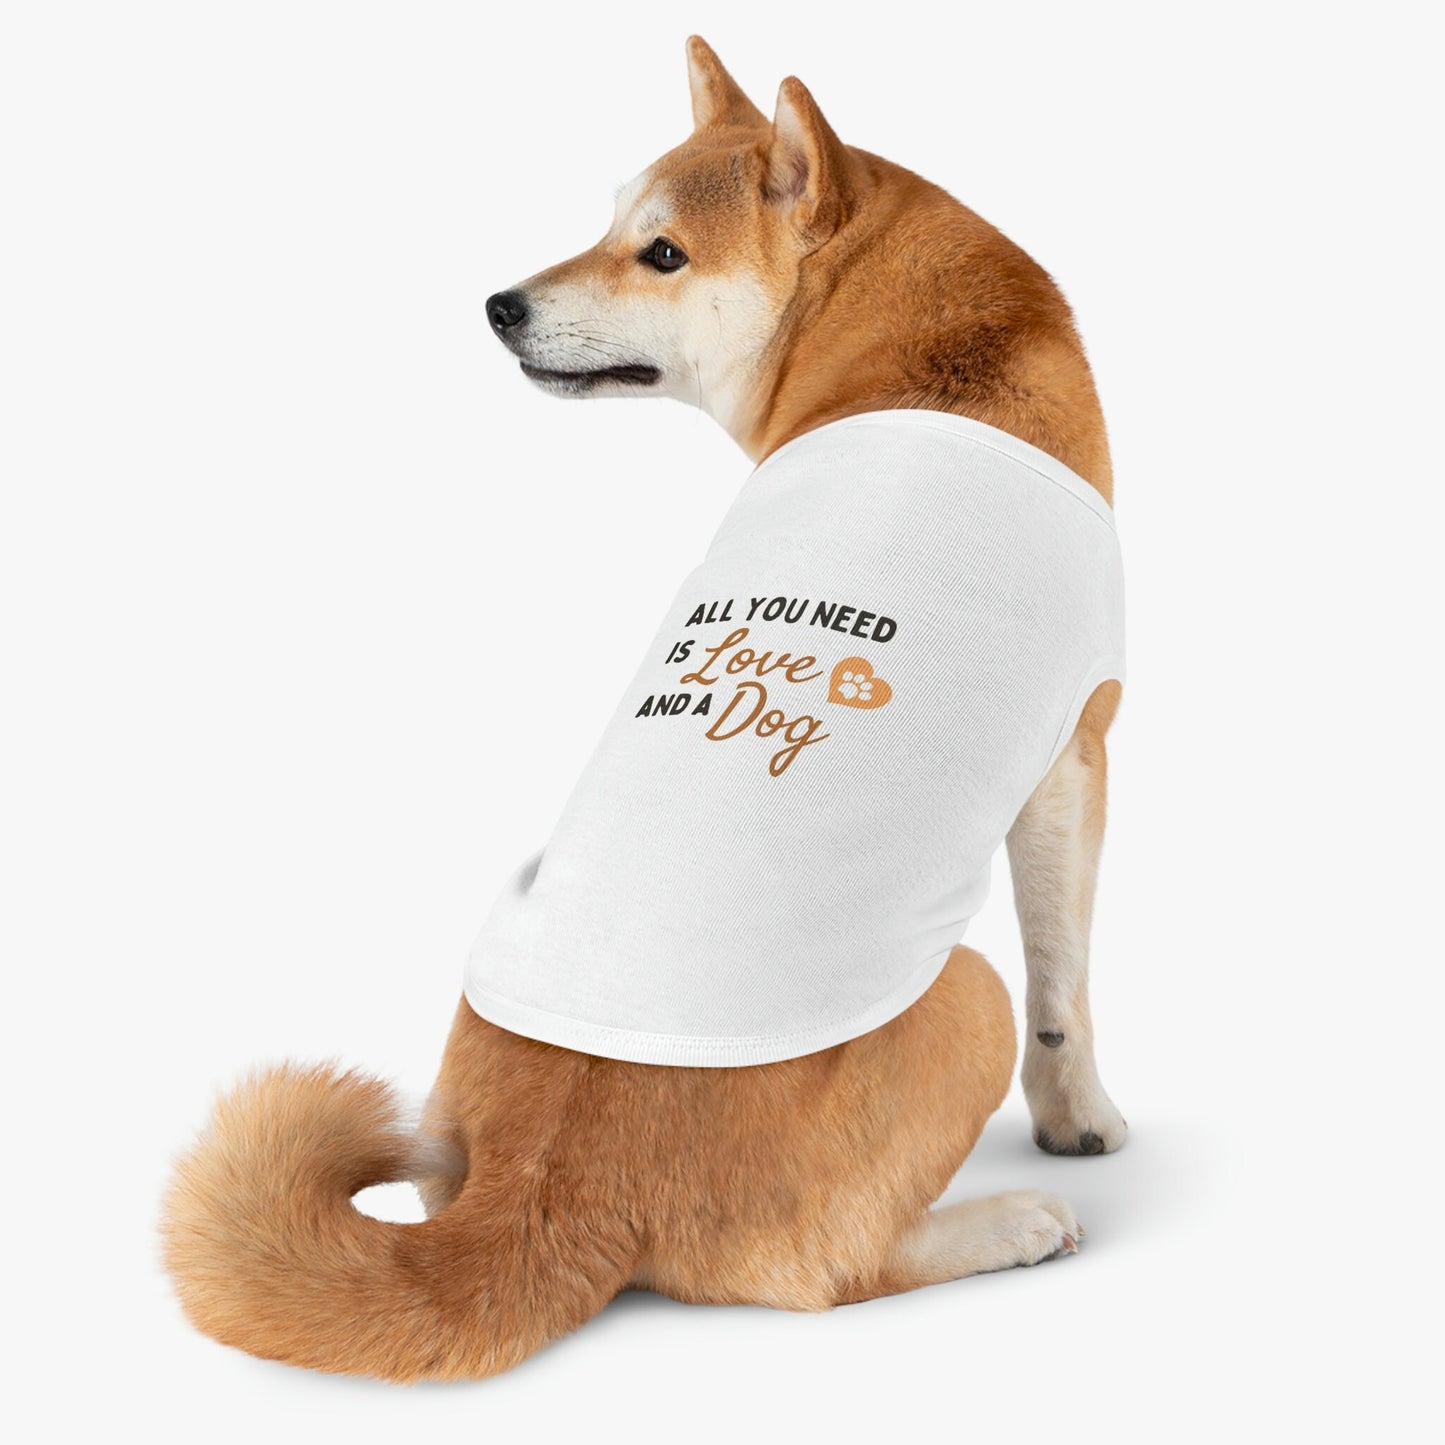 All you need is Love and a Dog Pet Tank Top Shirt*